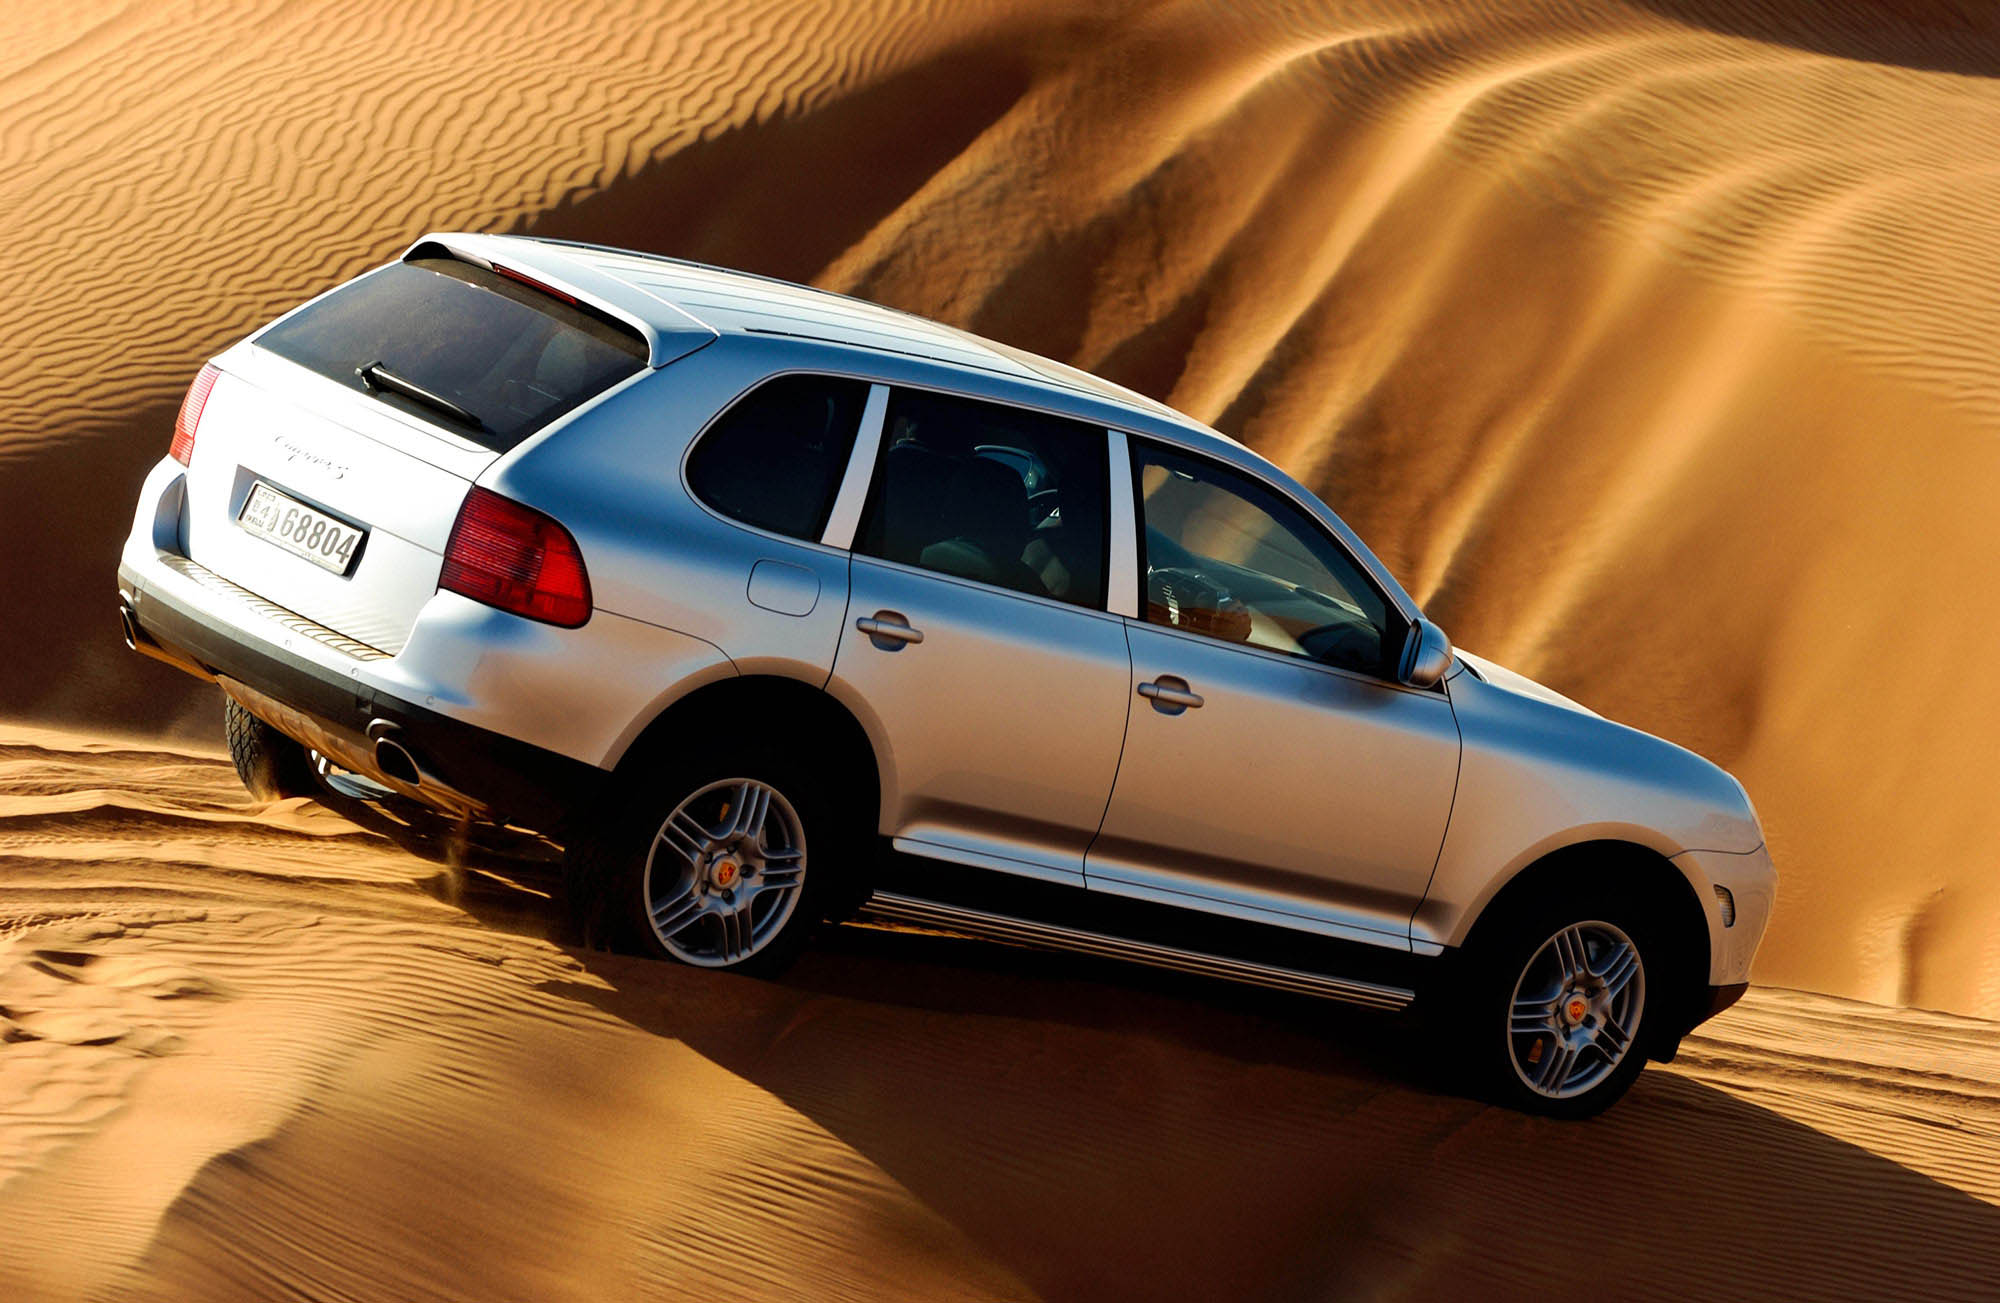 Porsche Cayenne pitches over the crest of a sand dune